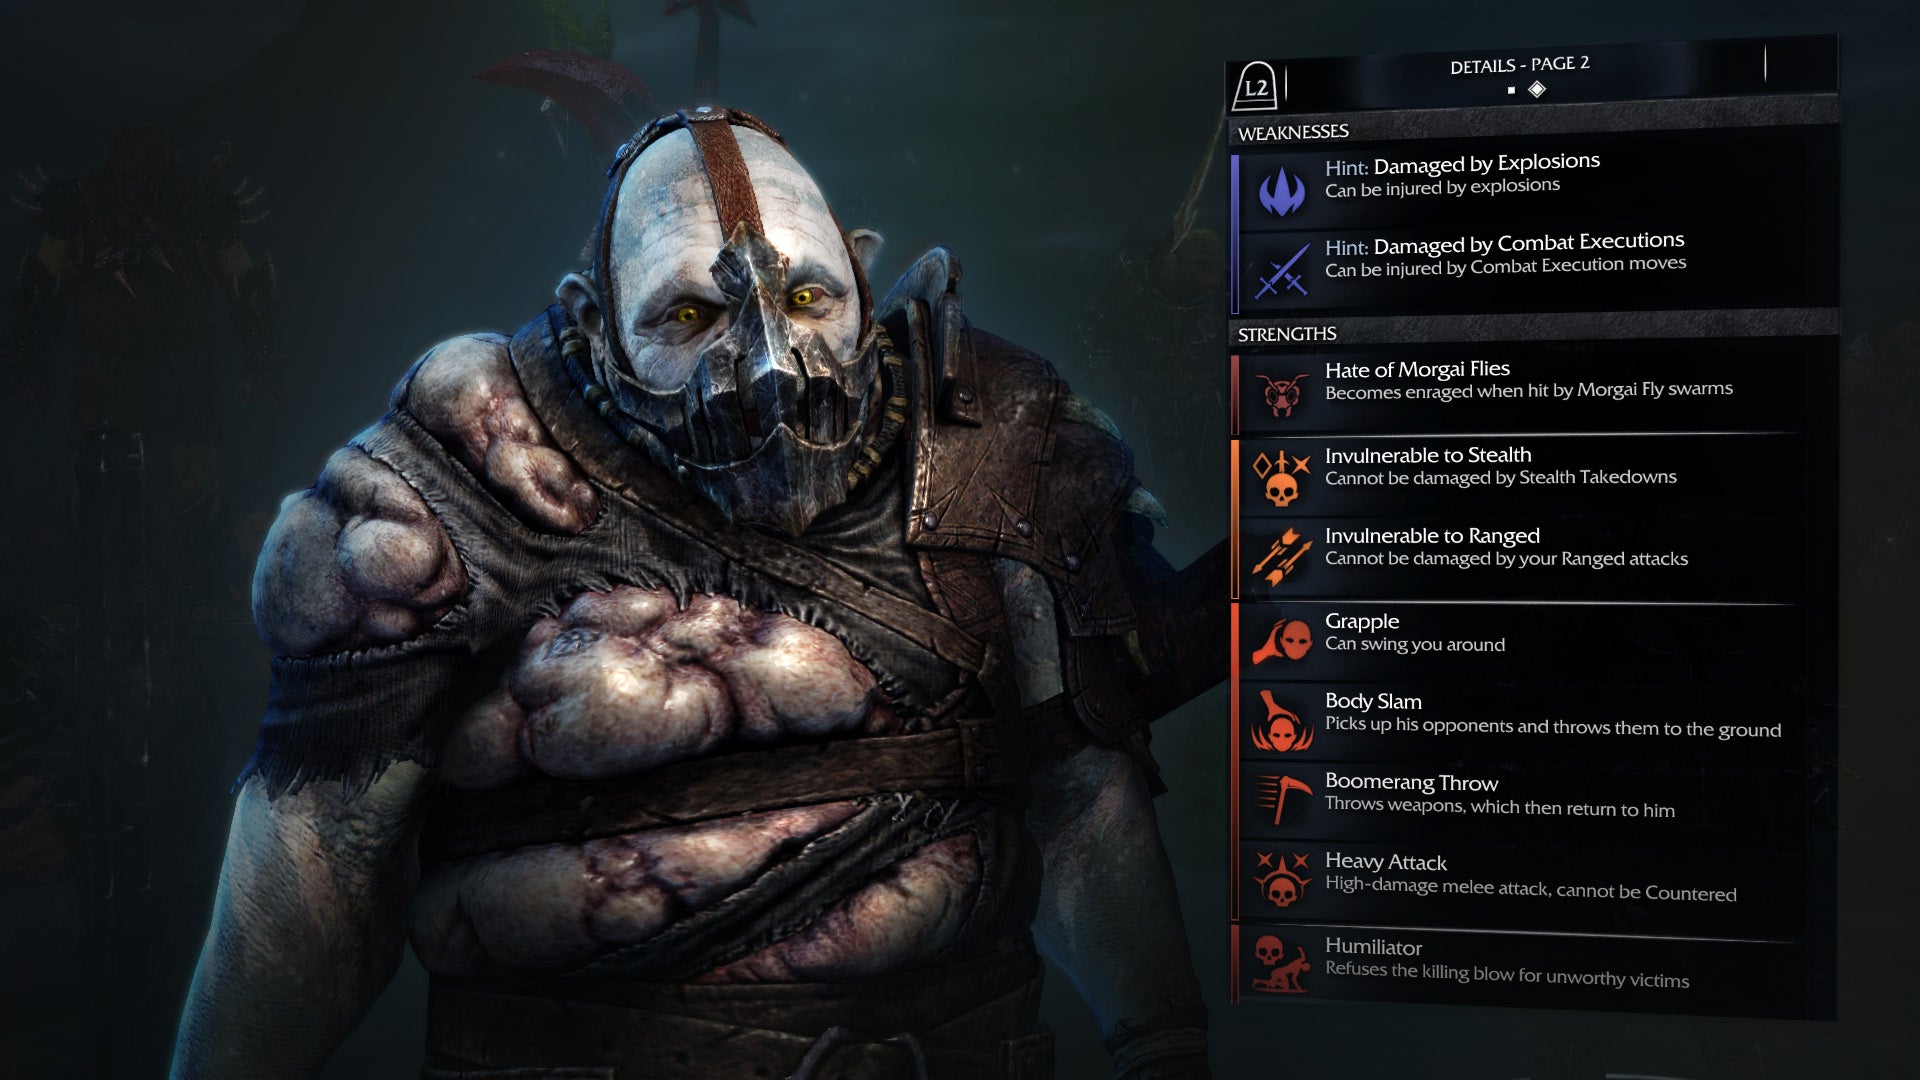 How to download directx 11 for shadow of mordor